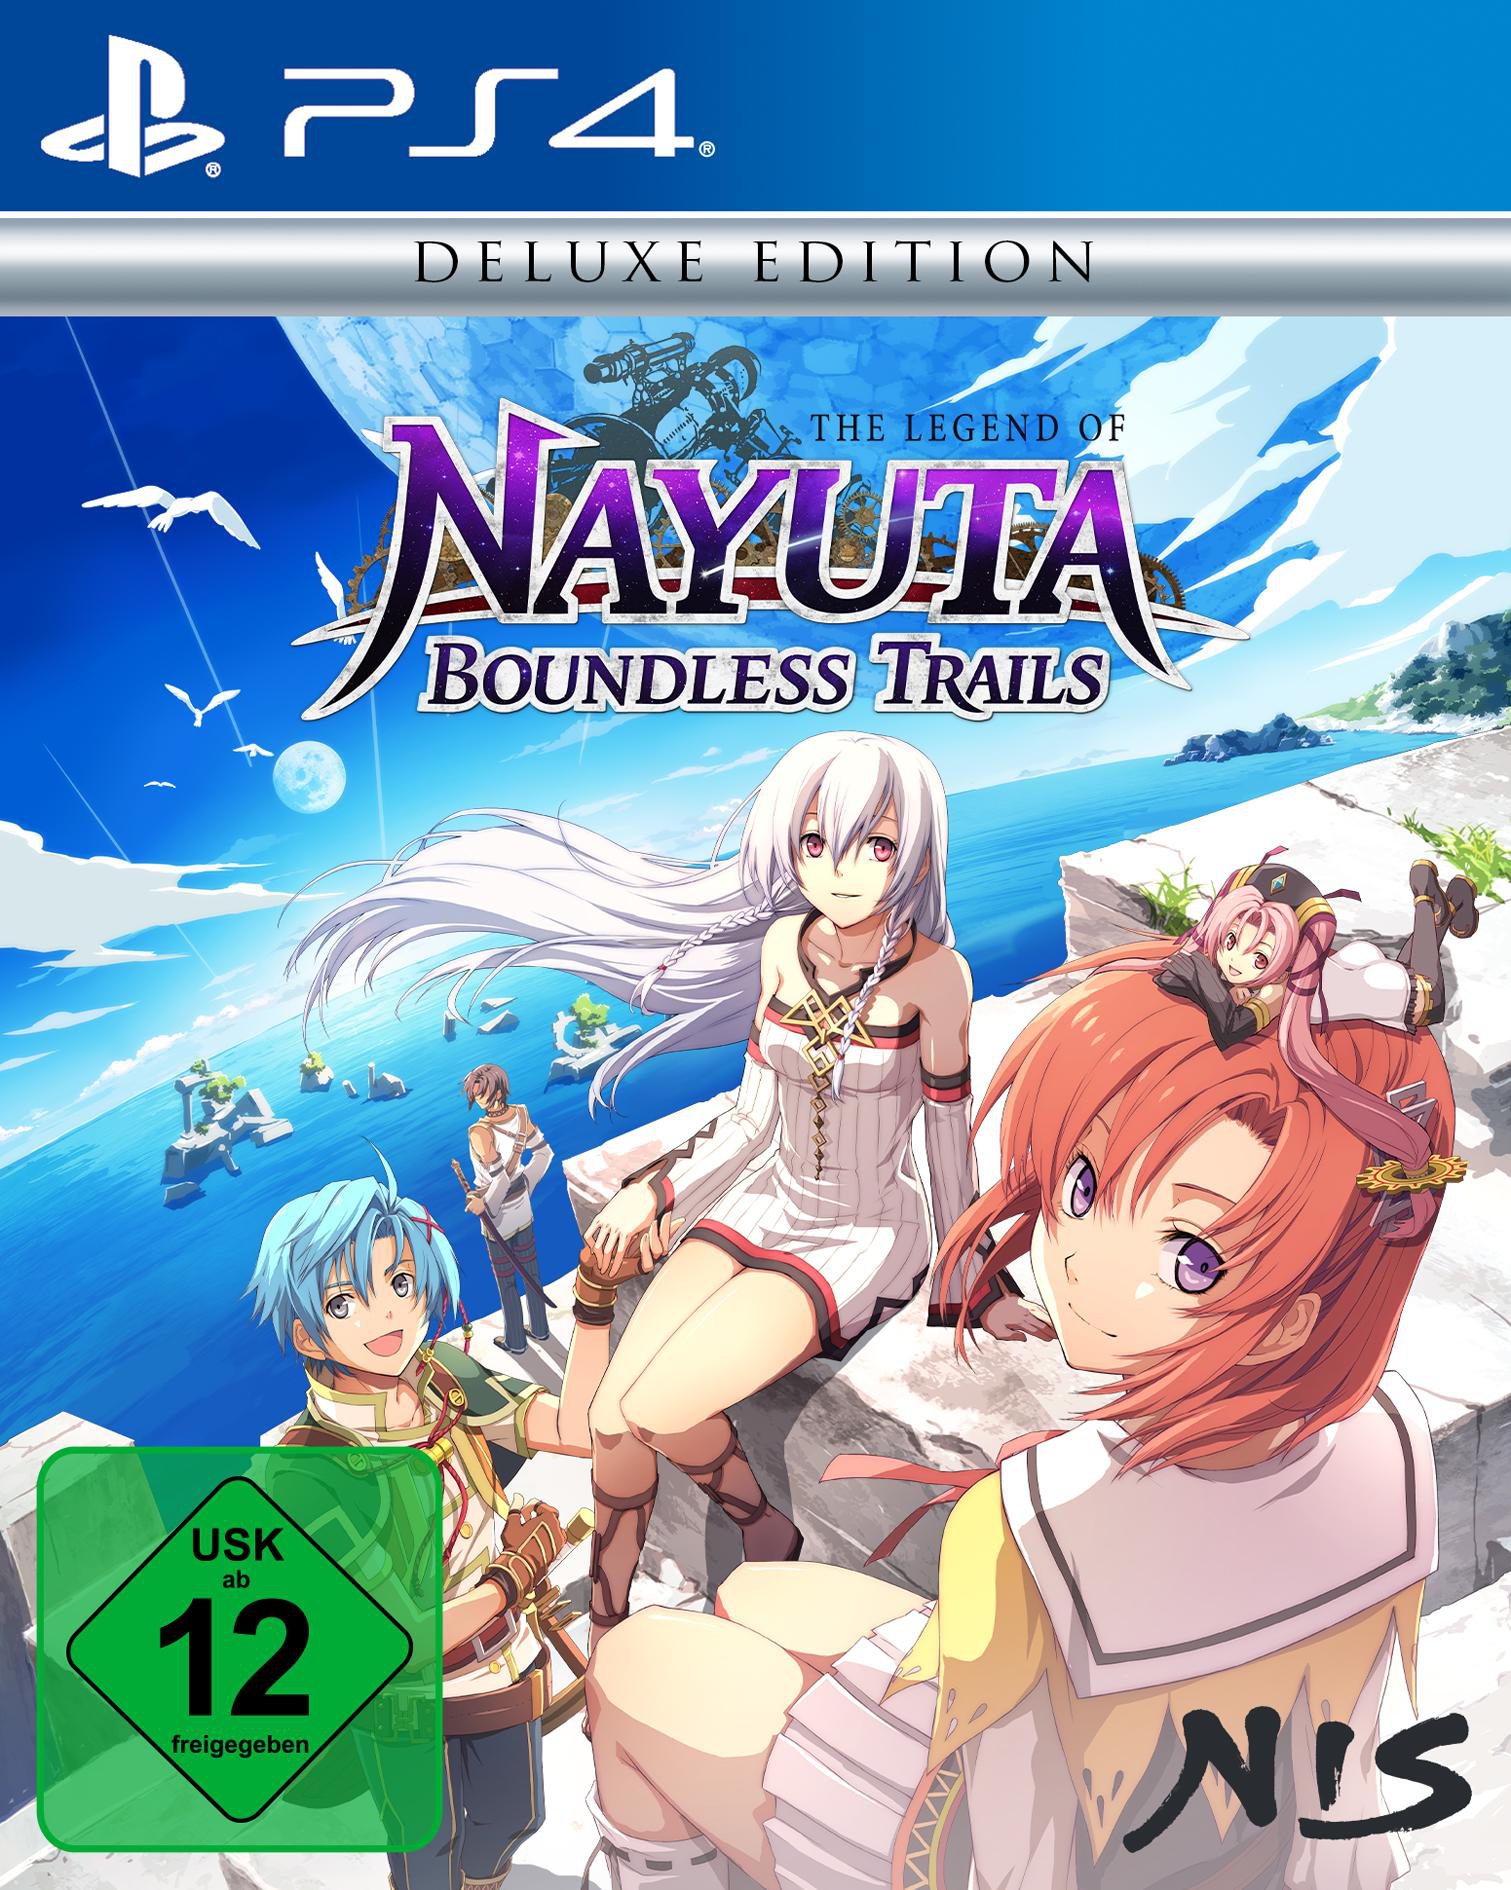 PS4 THE LEGEND OF - BOUNDLESS NAYUTA: [PlayStation 4] TRAILS